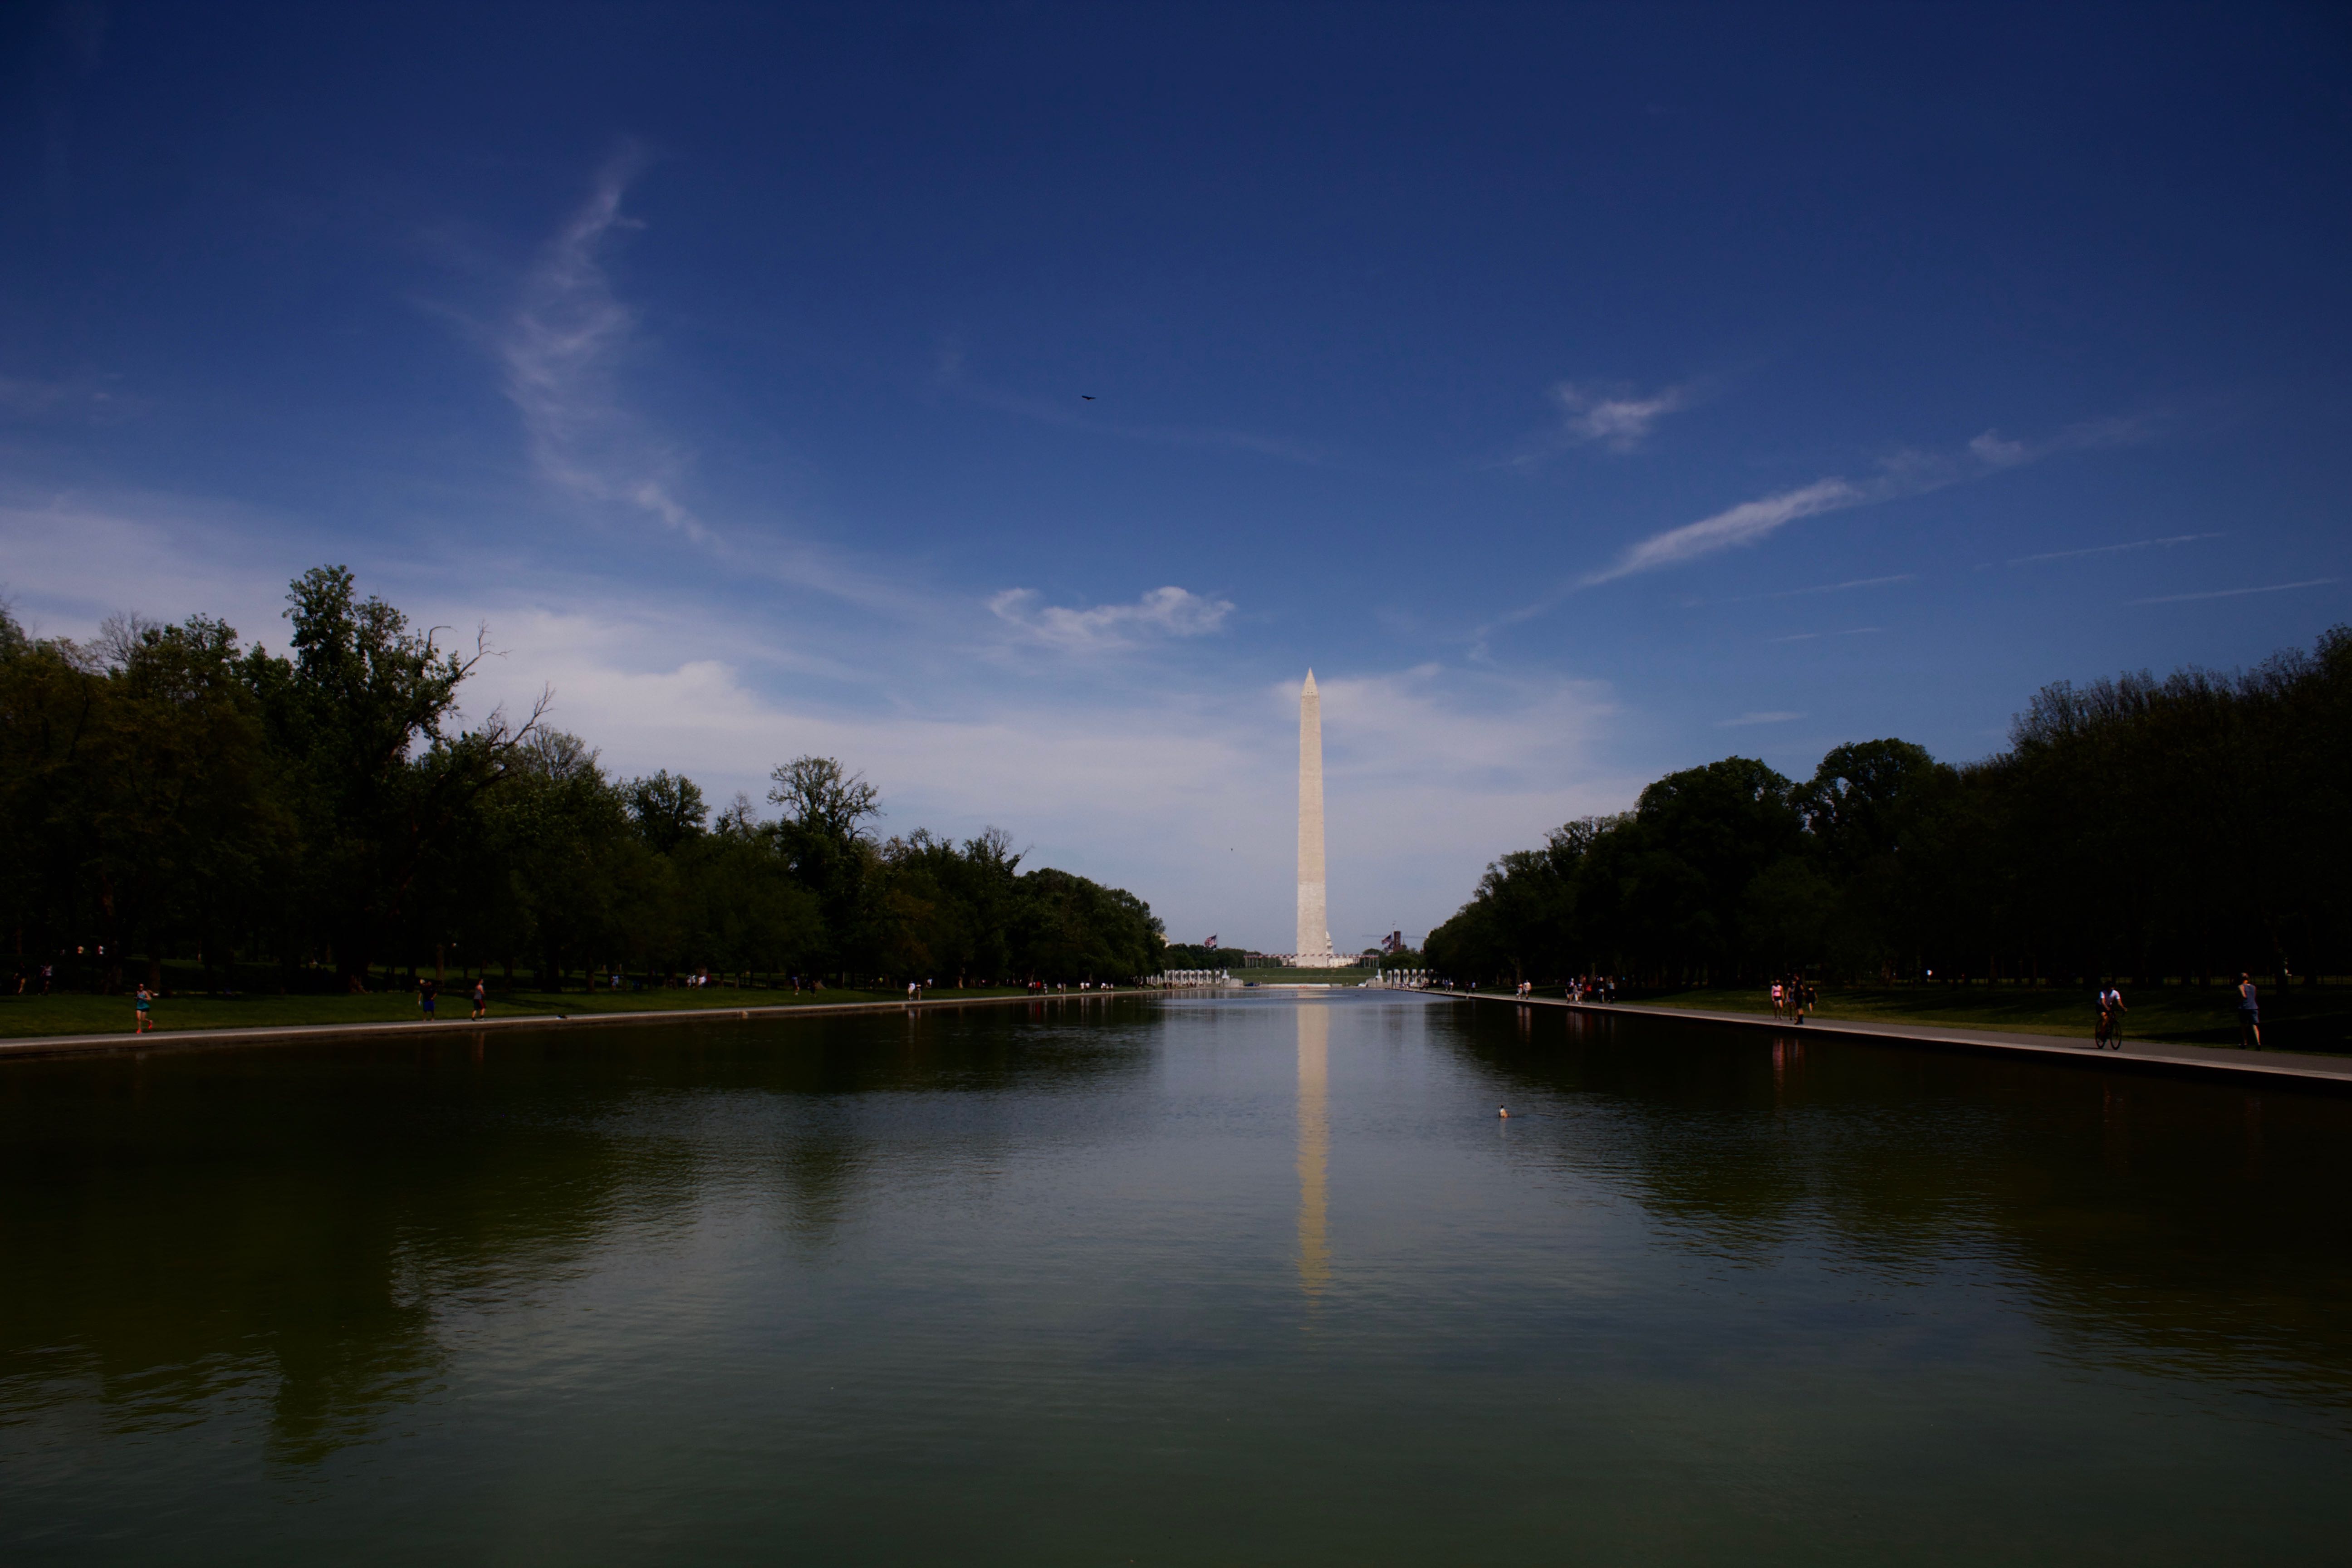 A reflecting pool - the Washington Monument in the distance.